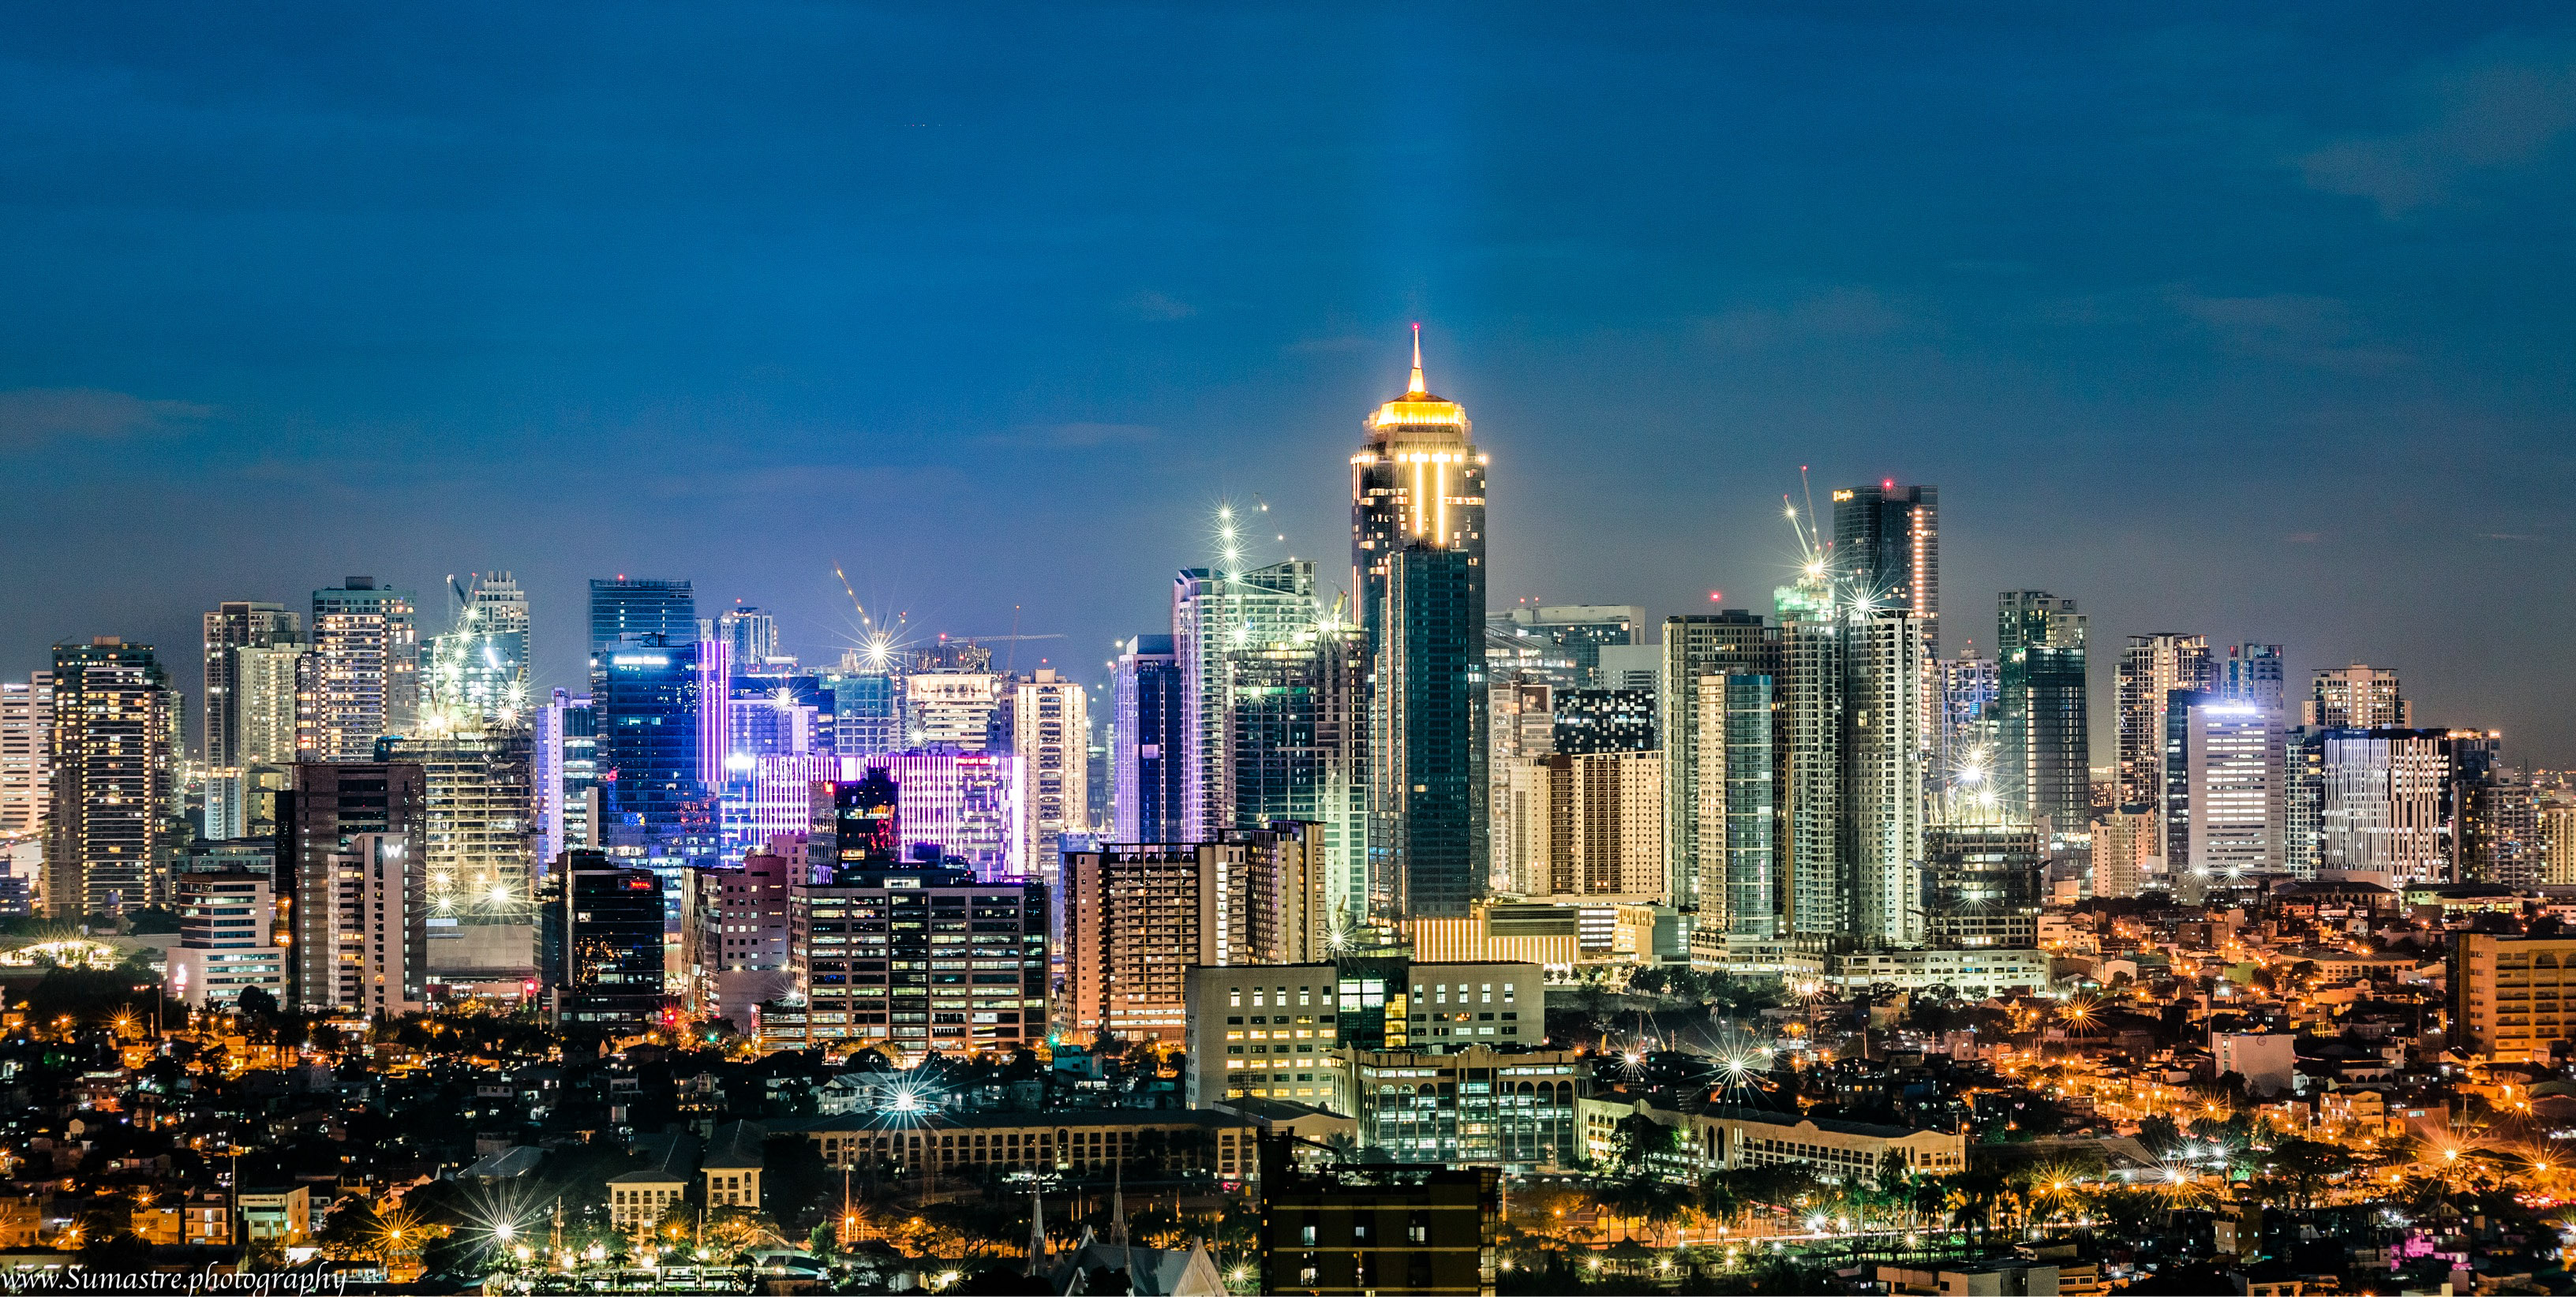 The Philippines' foremost skyline with world-class skyscrapers. With potential for AI and blockchain.